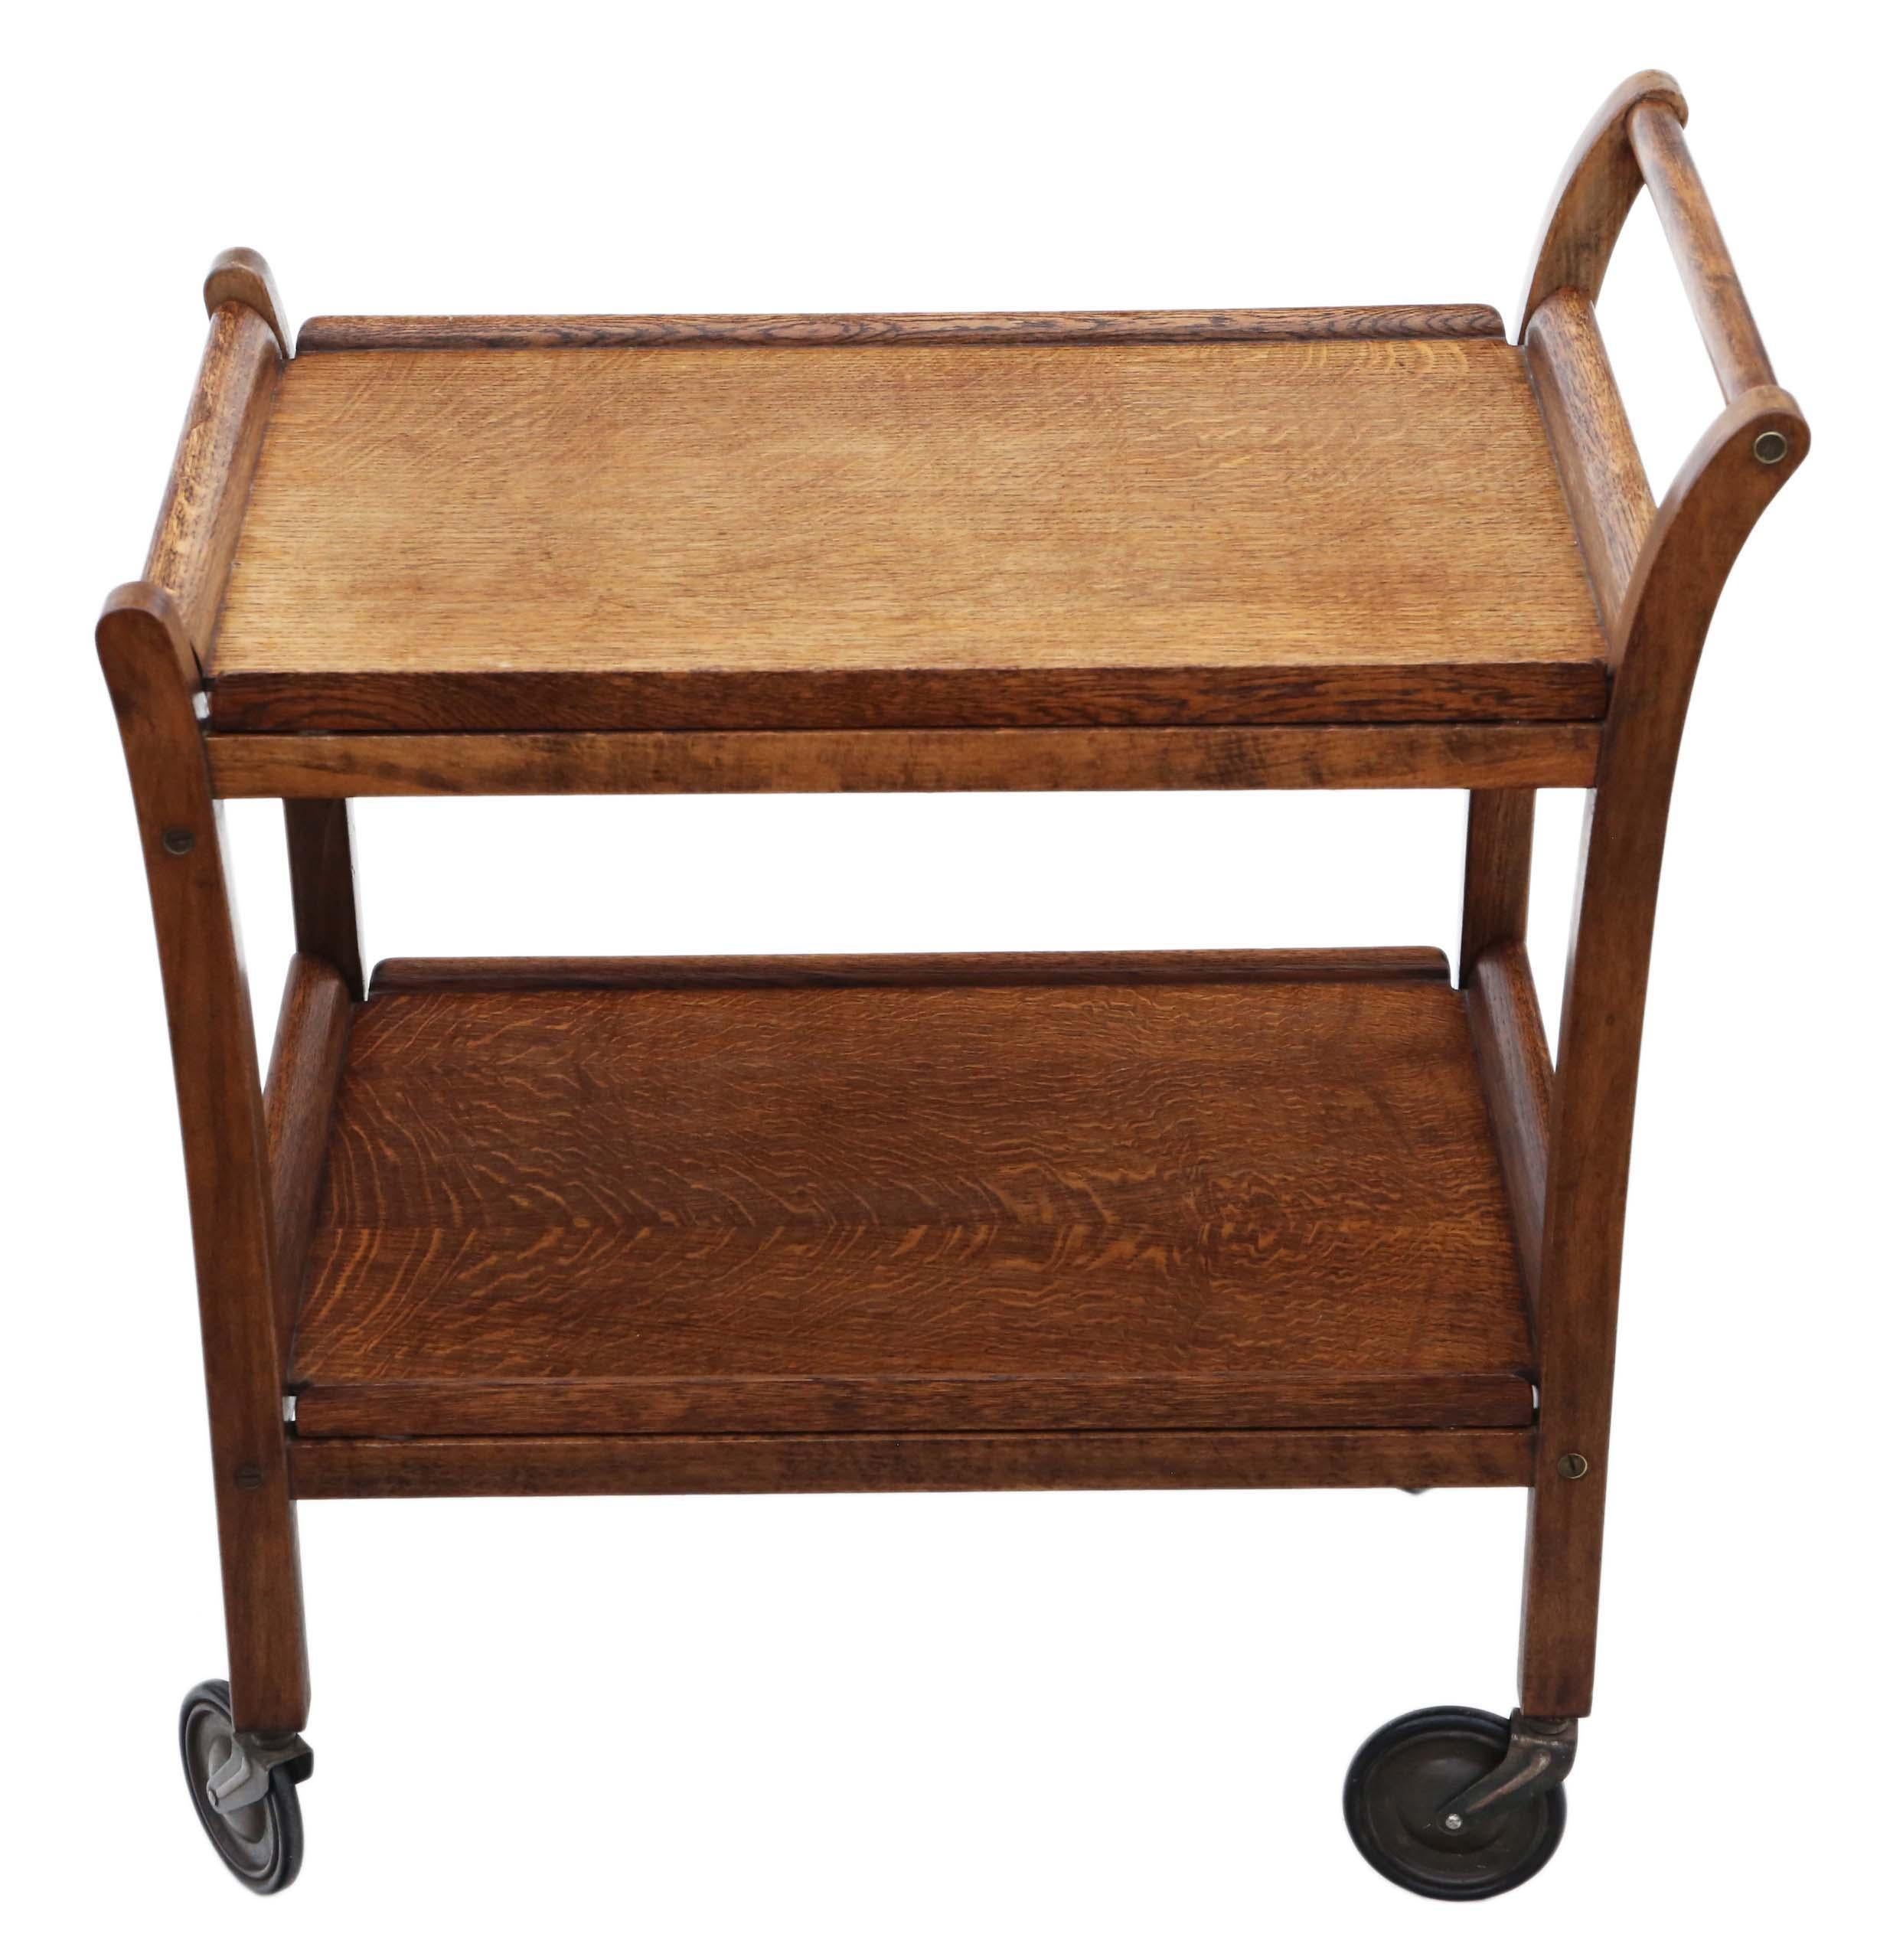 Antique Art Deco oak cake drinks serving table or trolley C1930.

A beautiful piece that shouts retro style. Two lift out serving trays.

Would look amazing in the right location!

Overall maximum dimensions: 70cm L x 42cm W x 75cm H. Trays